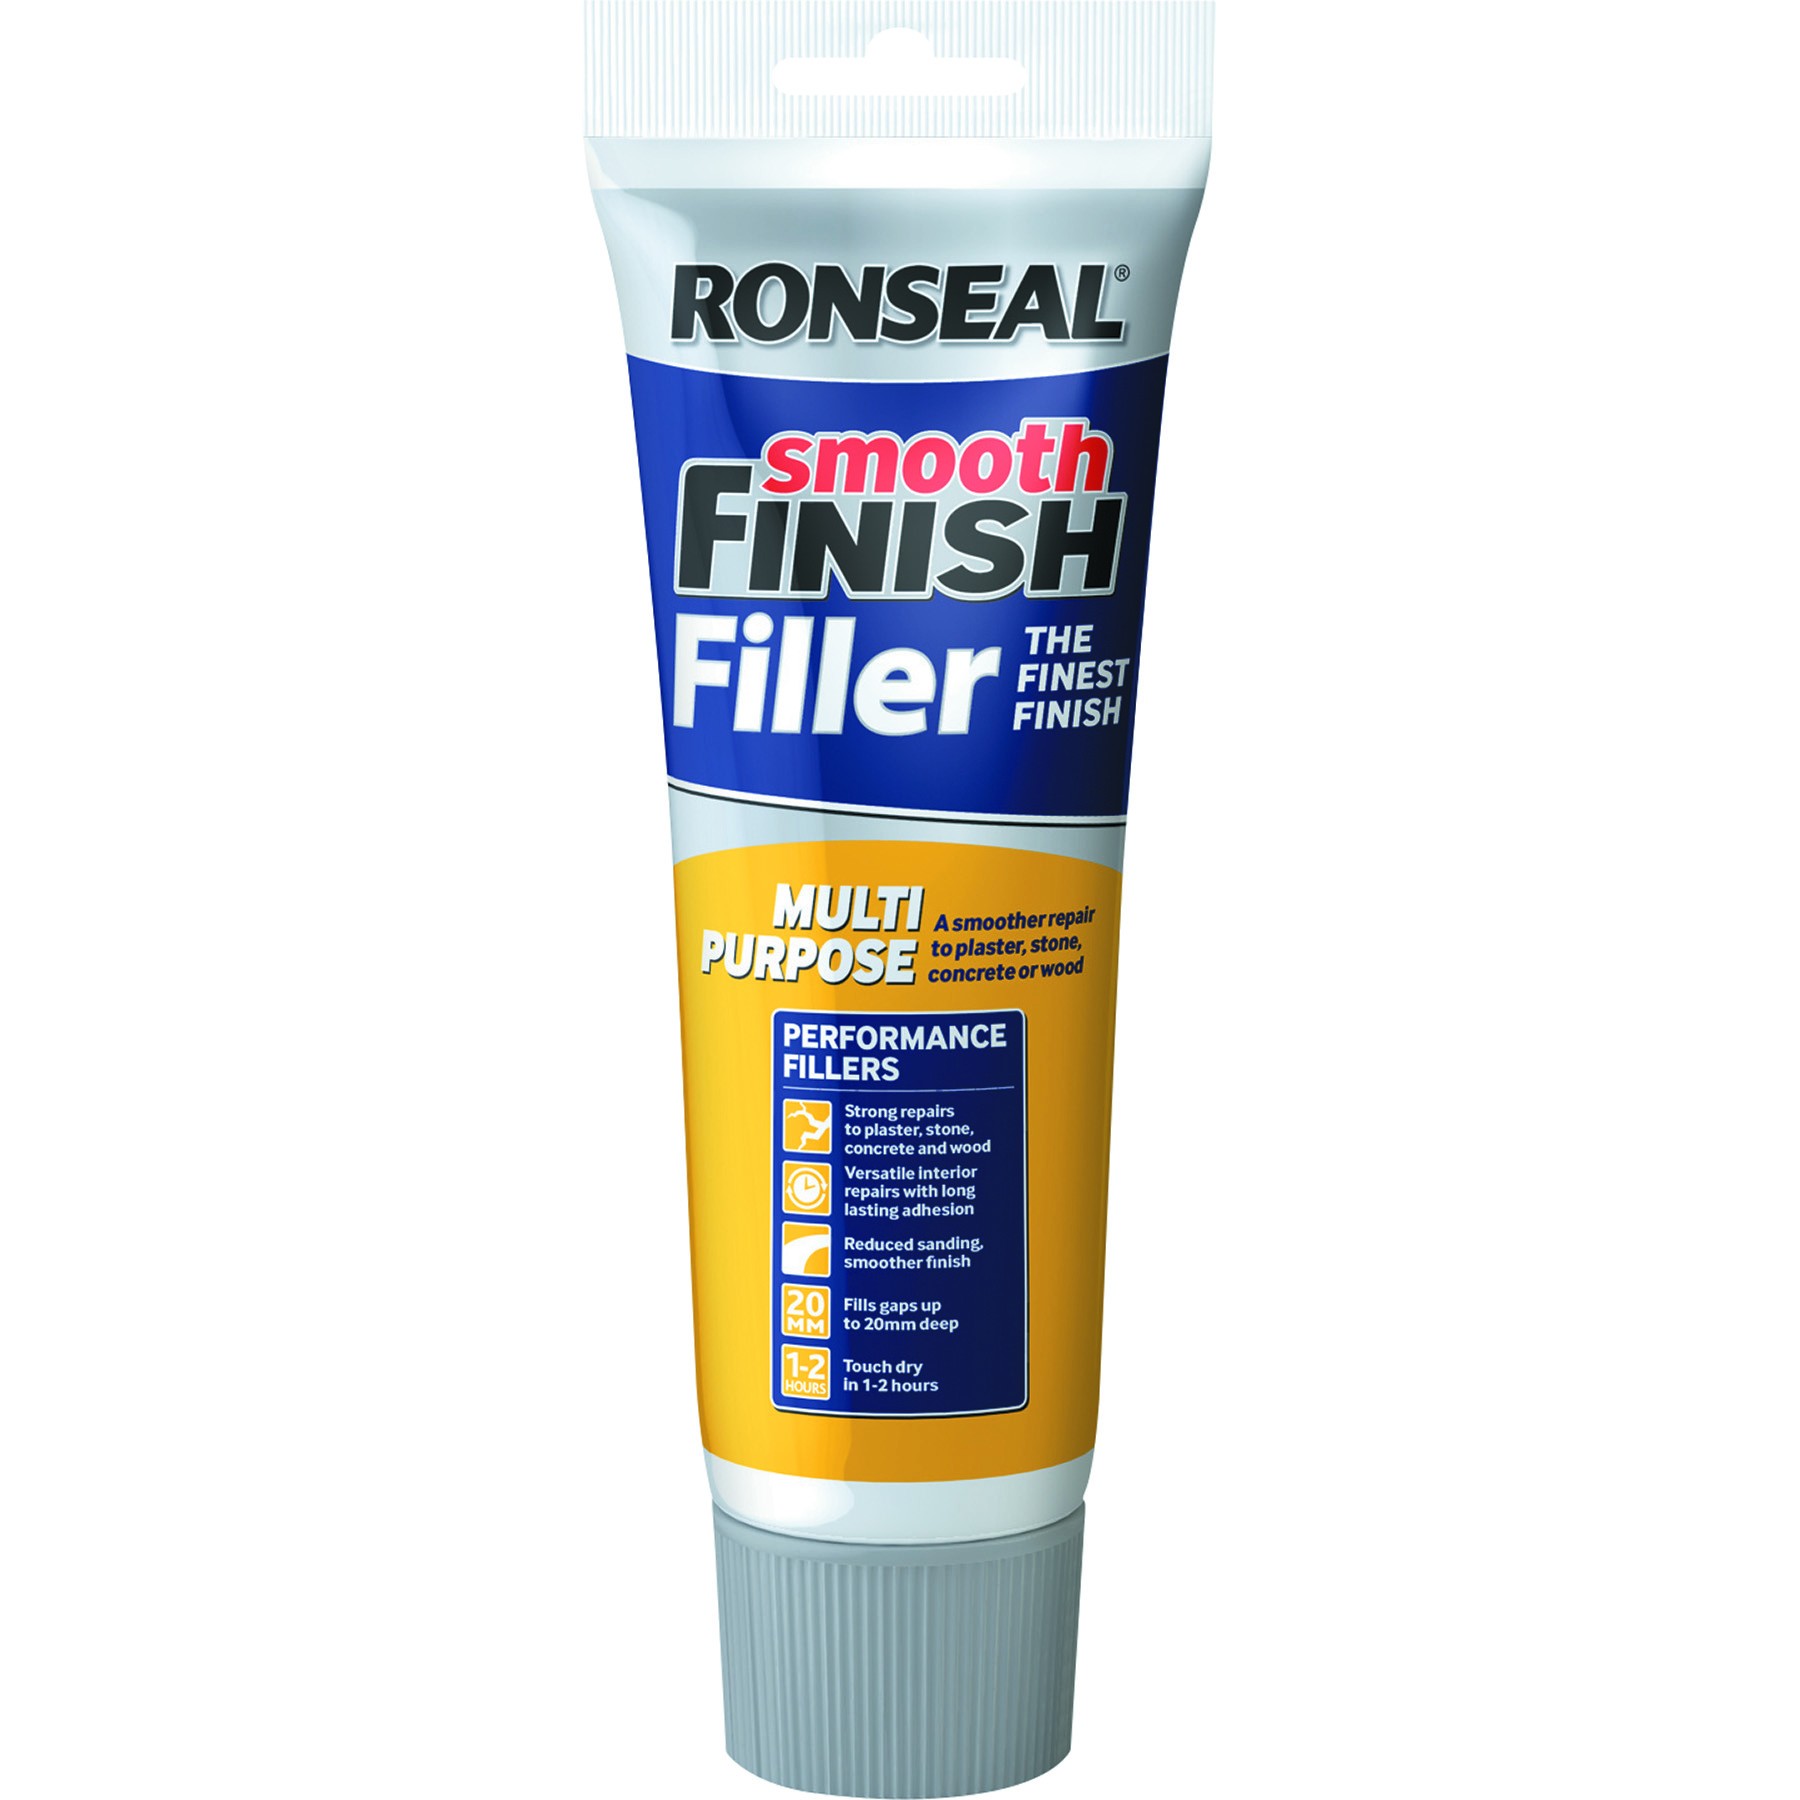 Ronseal Smooth Finish Multi Purpose Ready Mix Wall Filler 2.2kg [RONS36547]